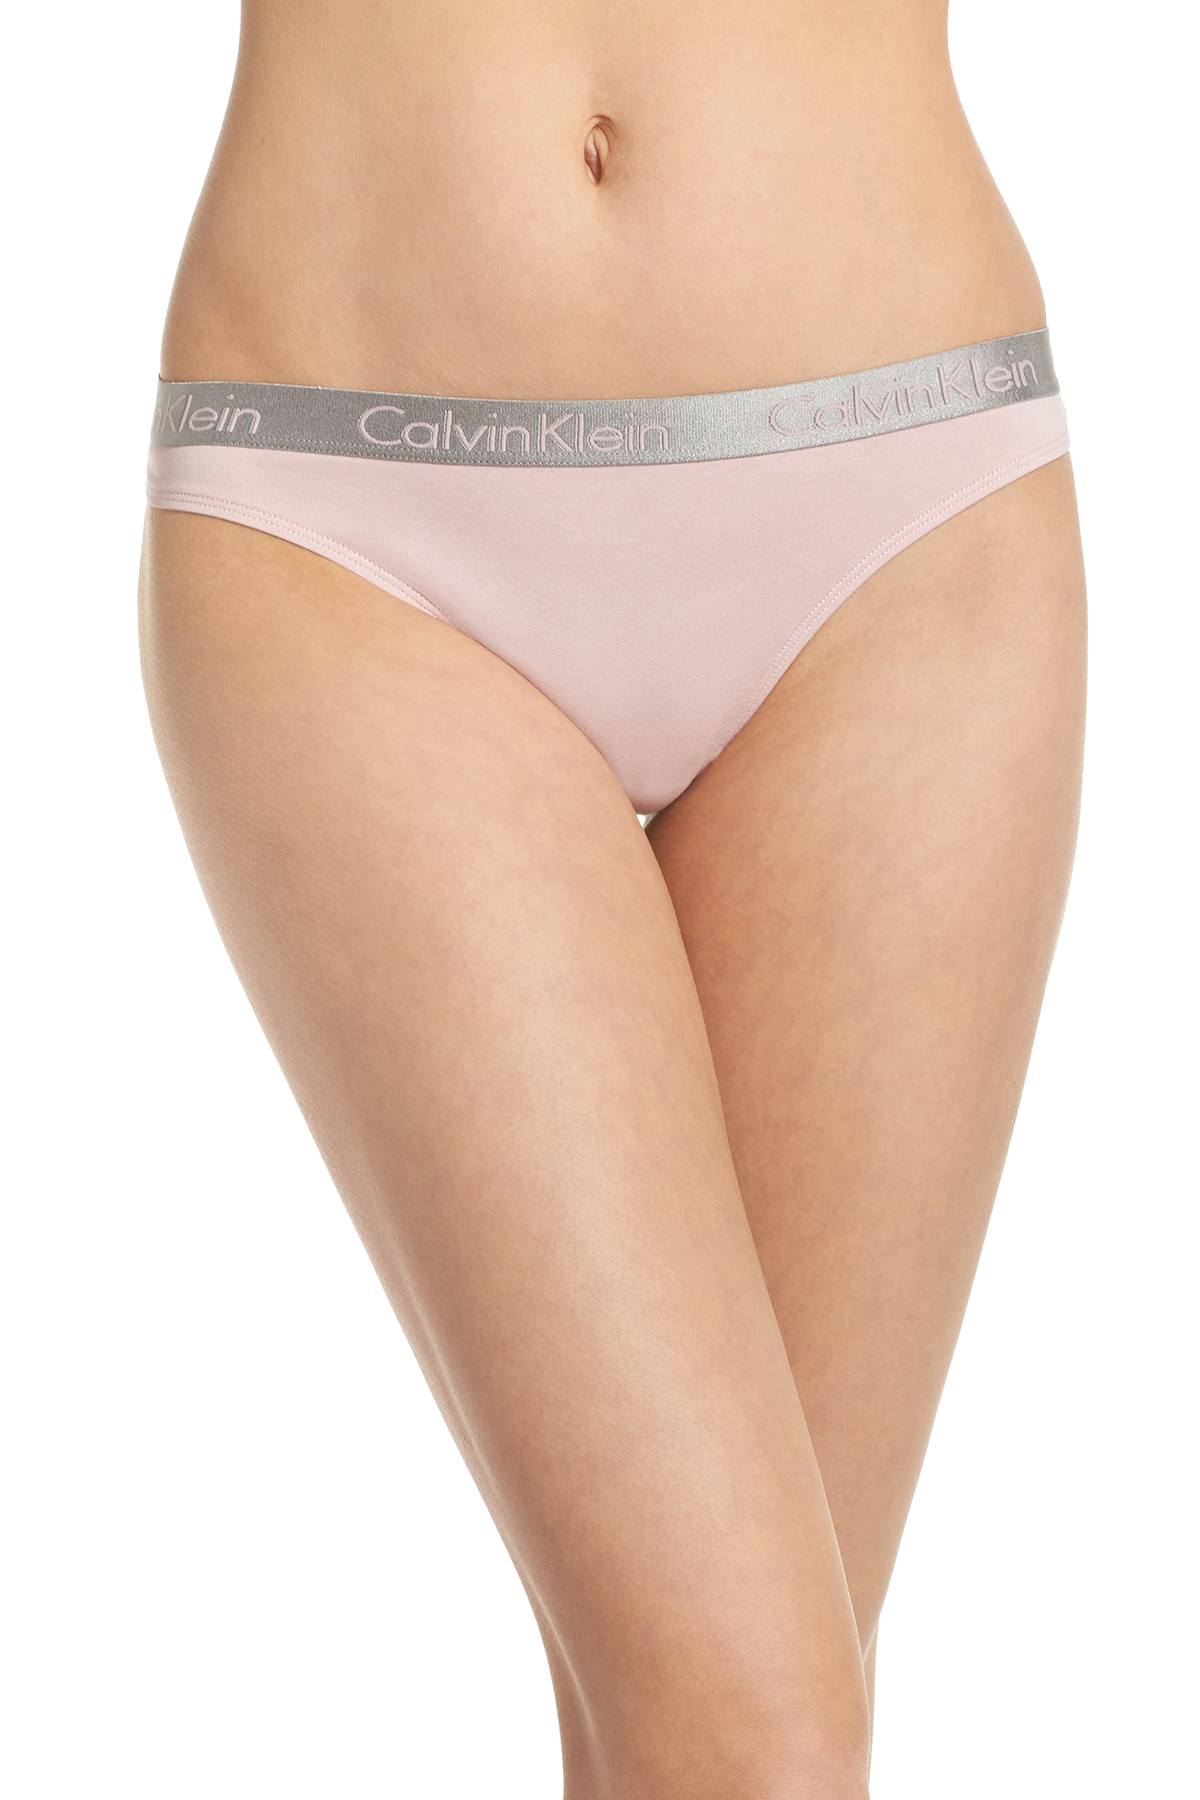 Calvin Klein Connected-Pink Radiant Cotton Thong